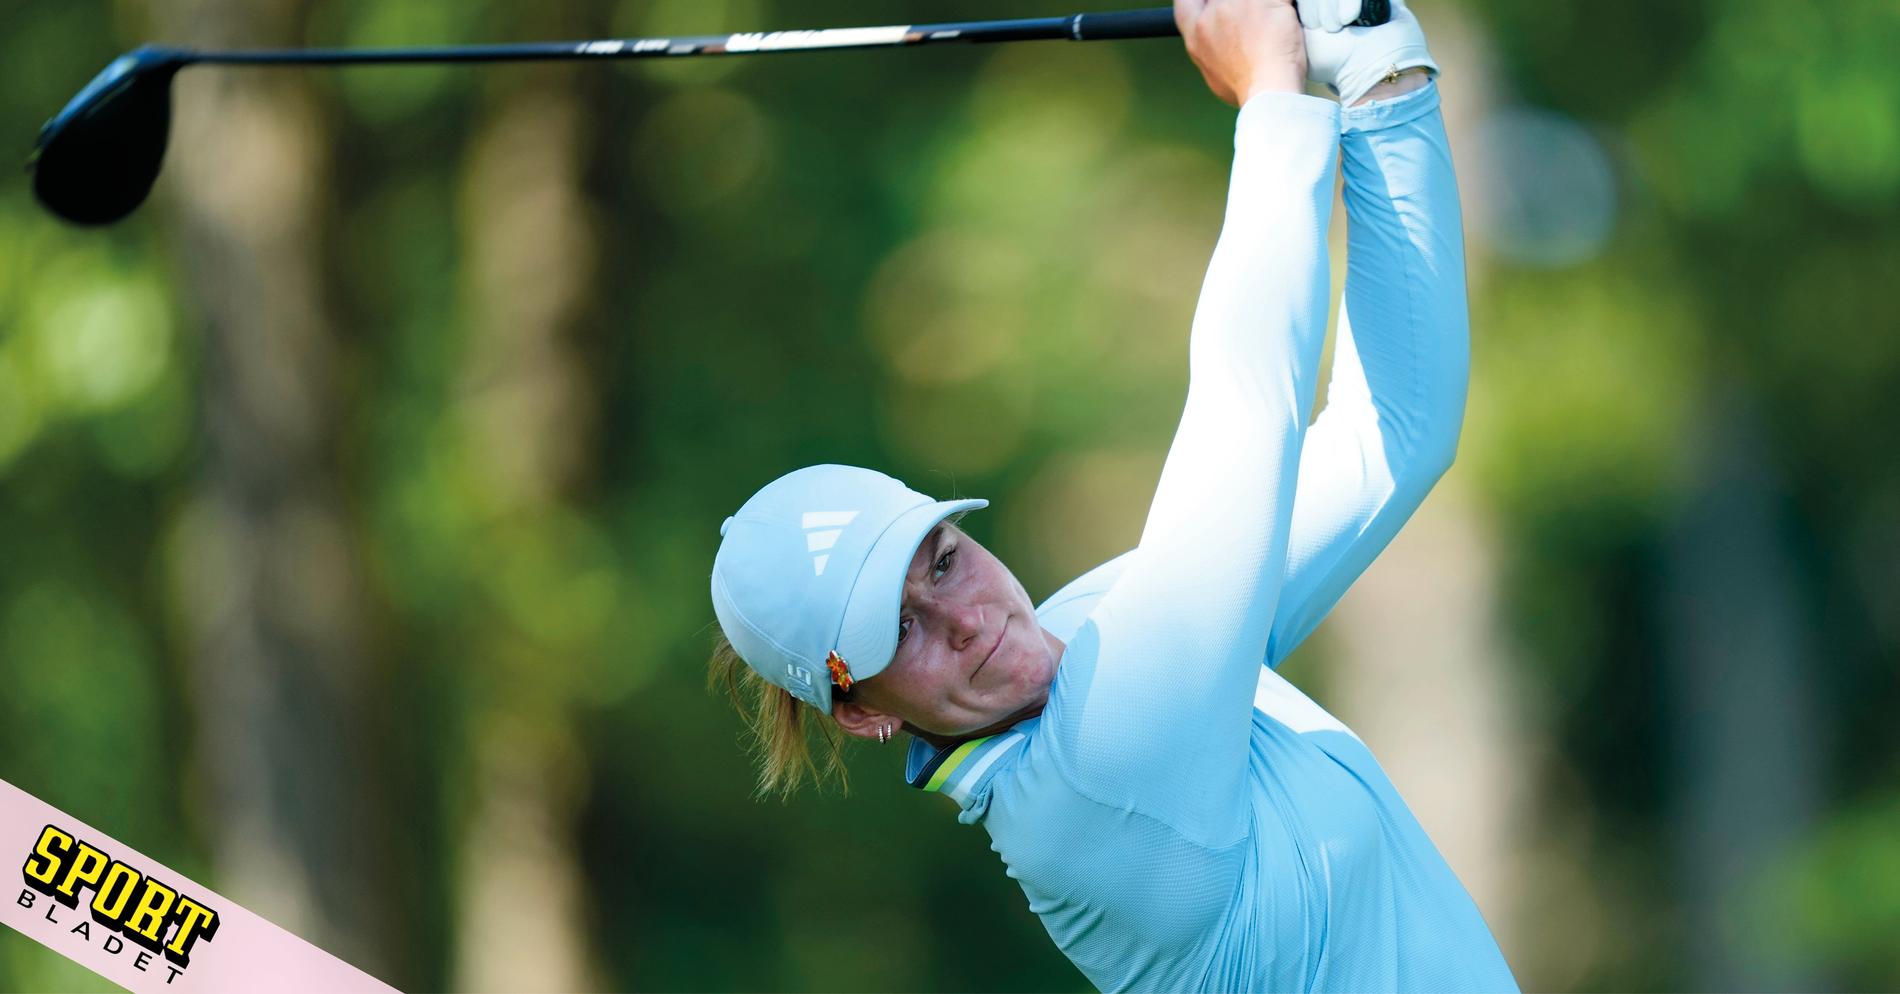 Linn Grant Takes the Lead at Dana Open with Impressive Round of 64